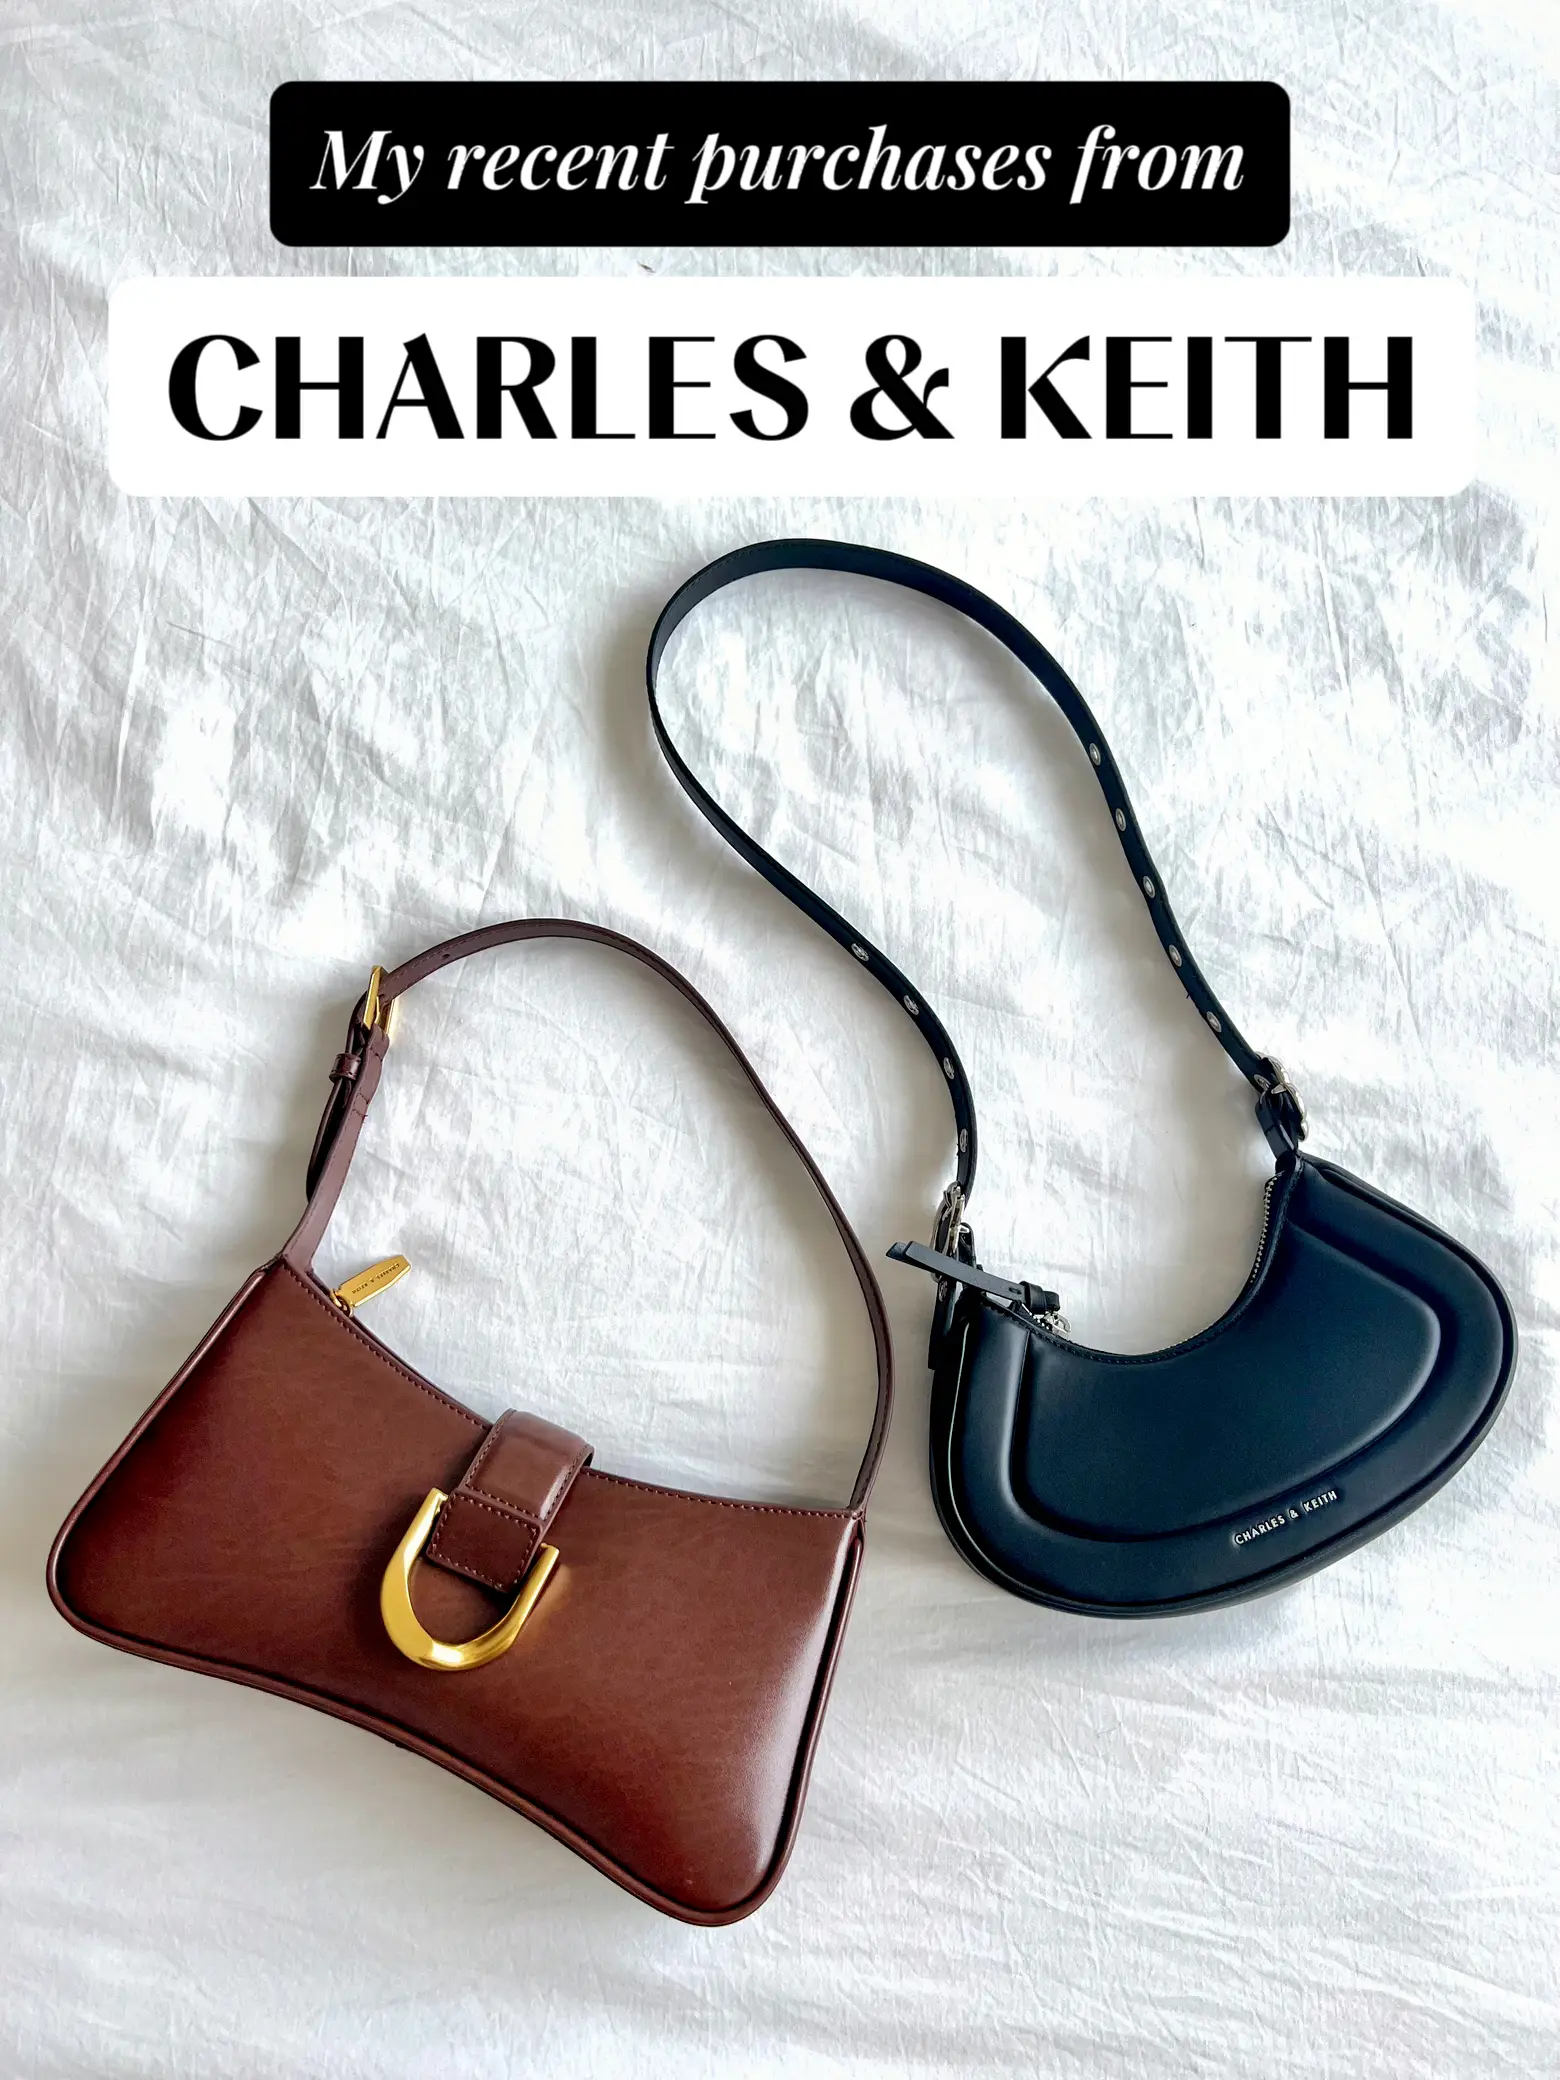 Charles & Keith's affordable bags and shoes are so well-made they are truly  luxurious